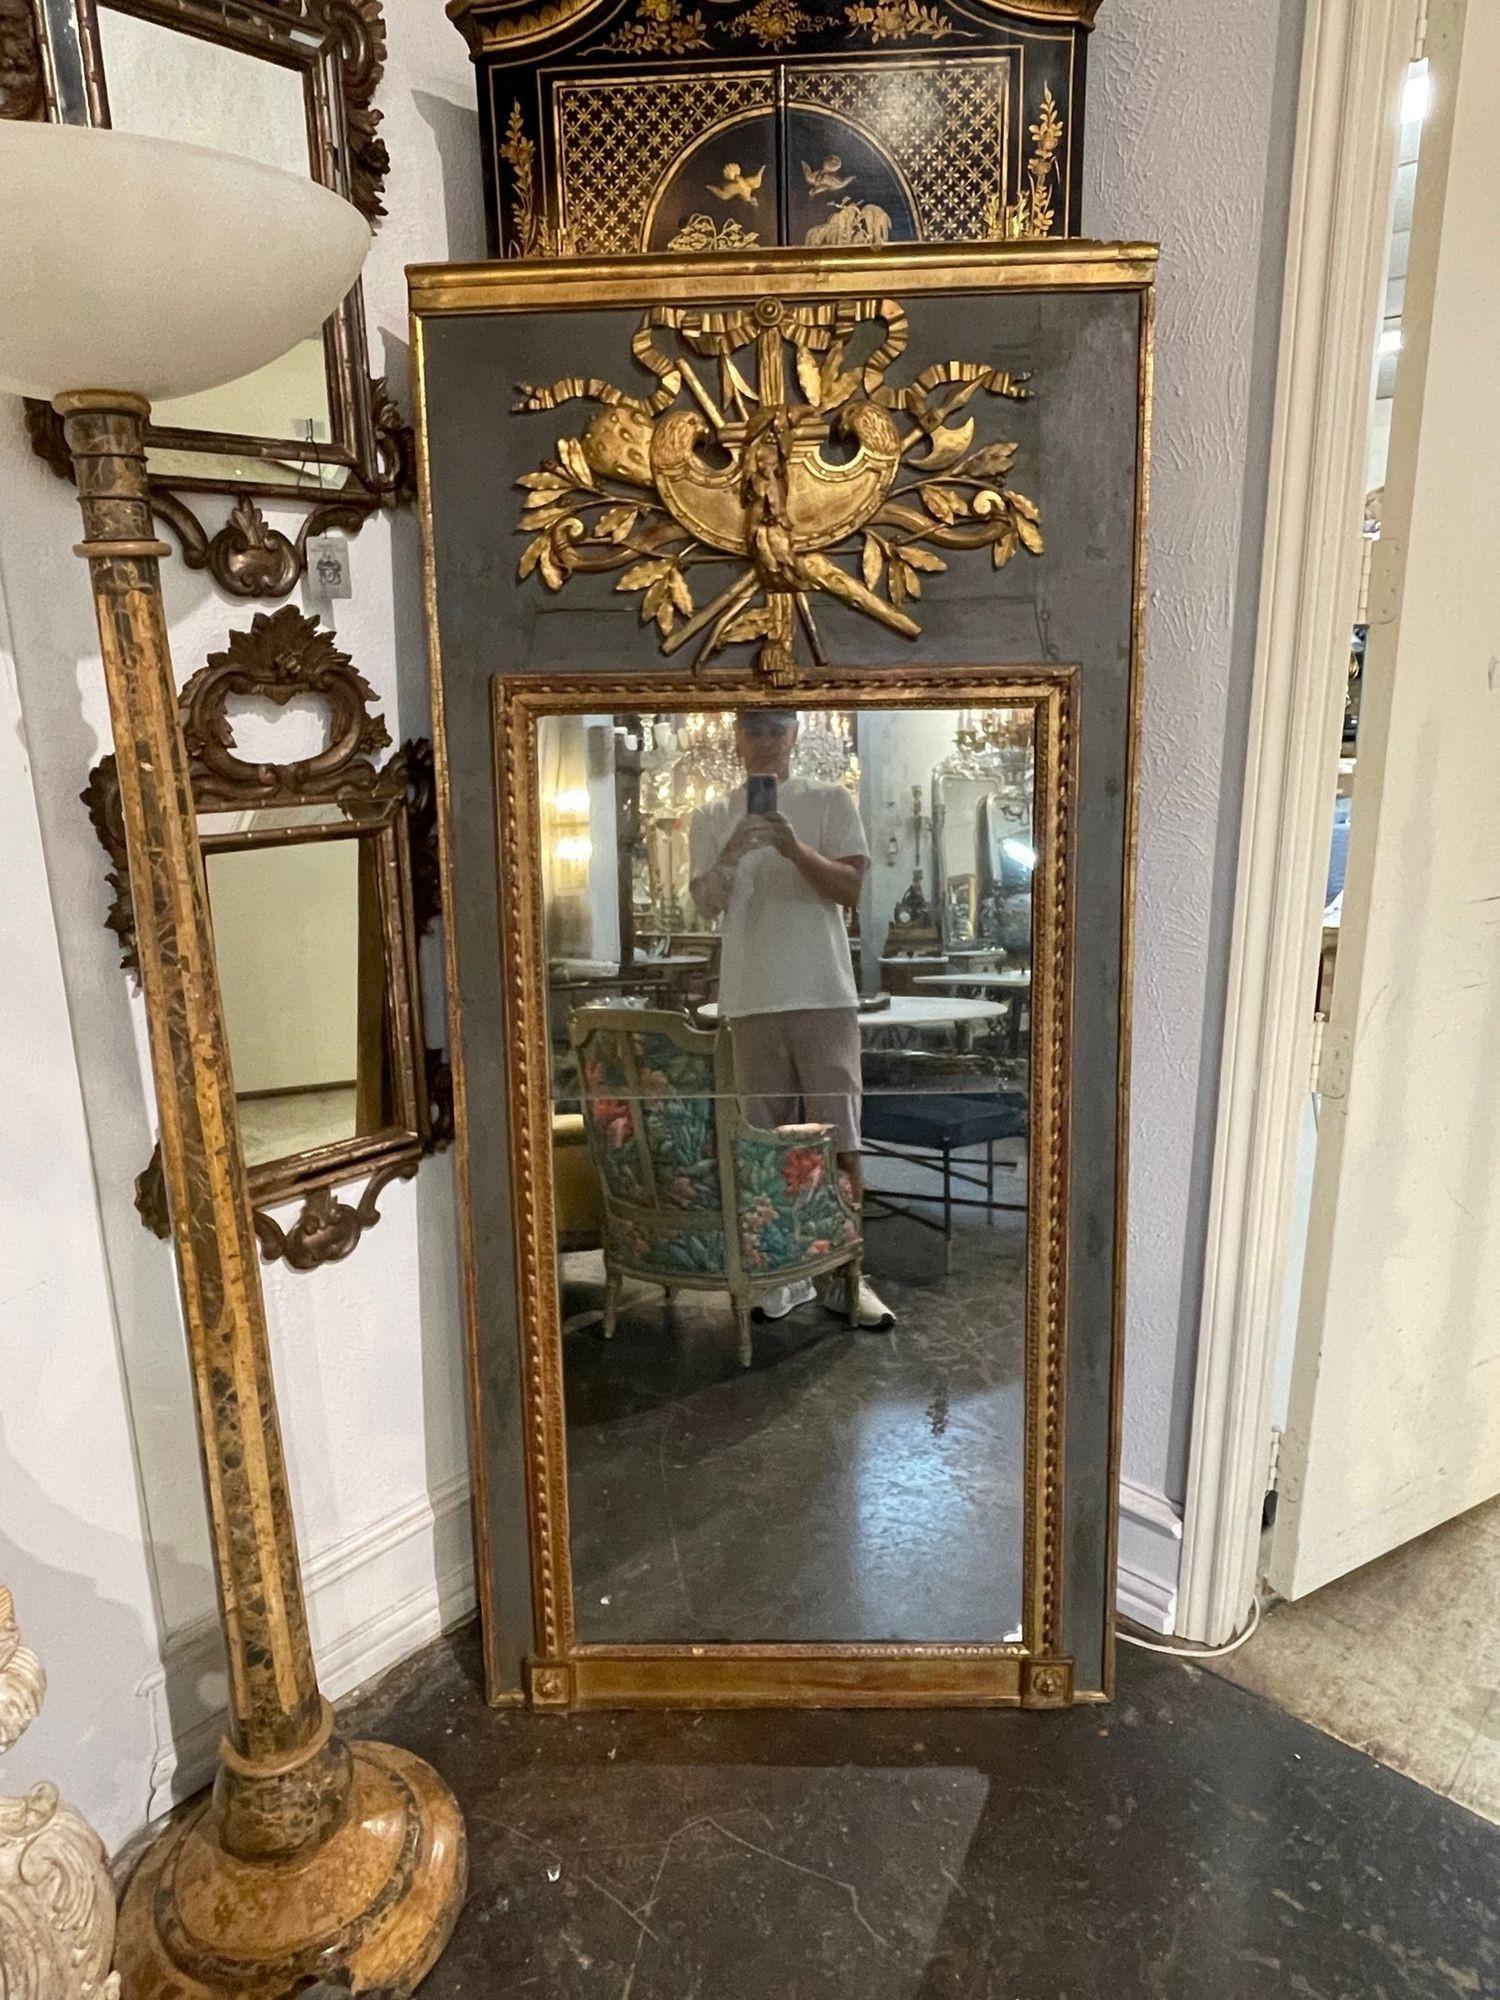 Gorgeous large scale 18th century French carved and parcel gilt Trumeau mirror. Very fine carvings including a large crest at the top of the mirror. Beautiful grey/green patina as well. Fabulous!